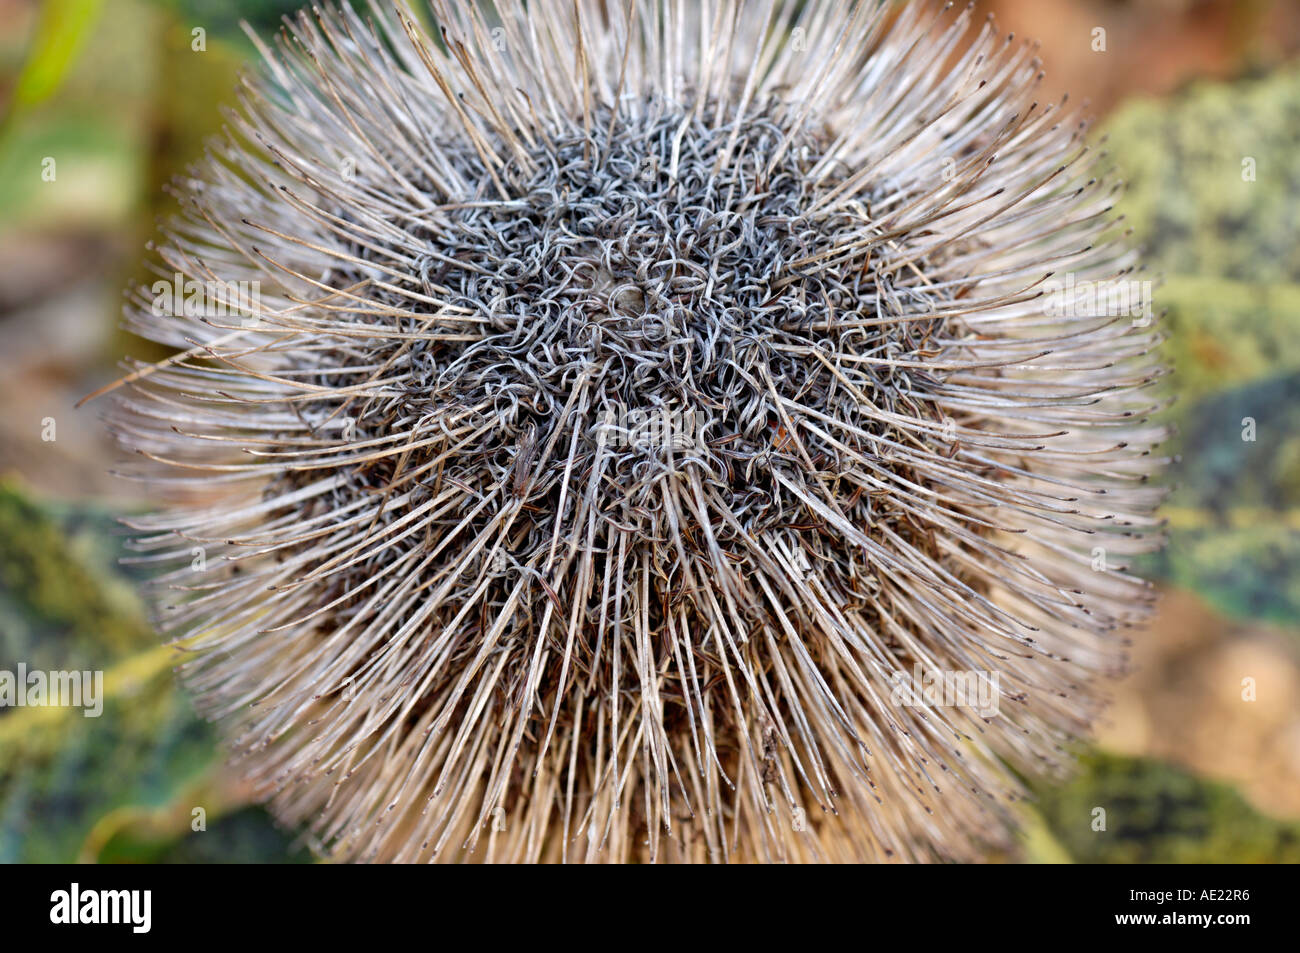 A close up high angle view of the top of a Swamp Banksia flower spike. Stock Photo